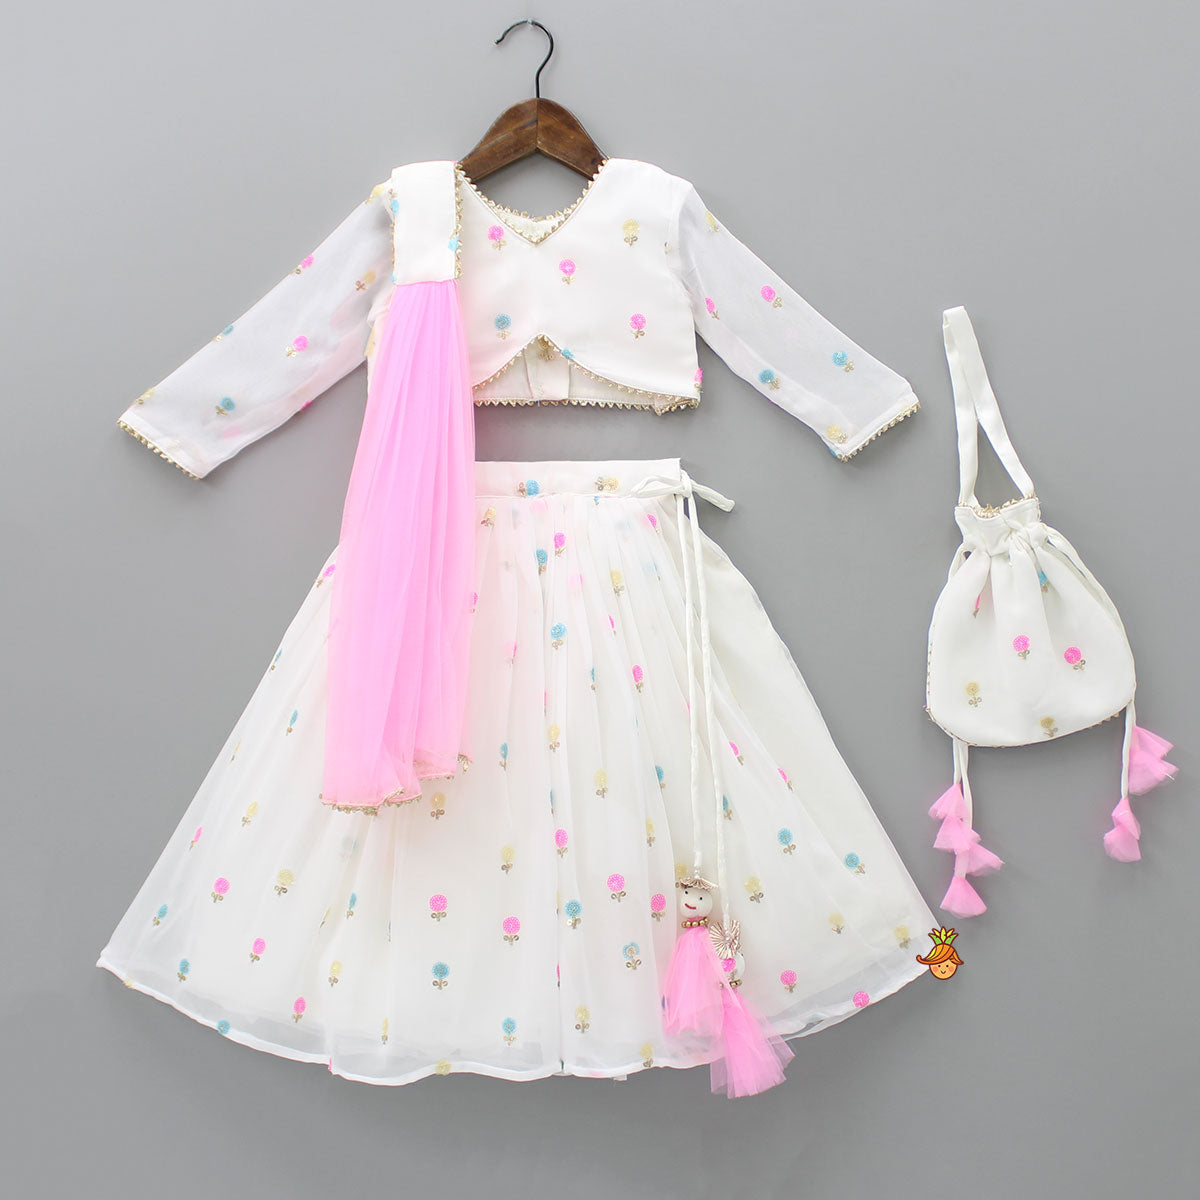 Pre Order: Embroidered Off-White Top And Lehenga With Contrasting Pink Net Dupatta And Potli Bag